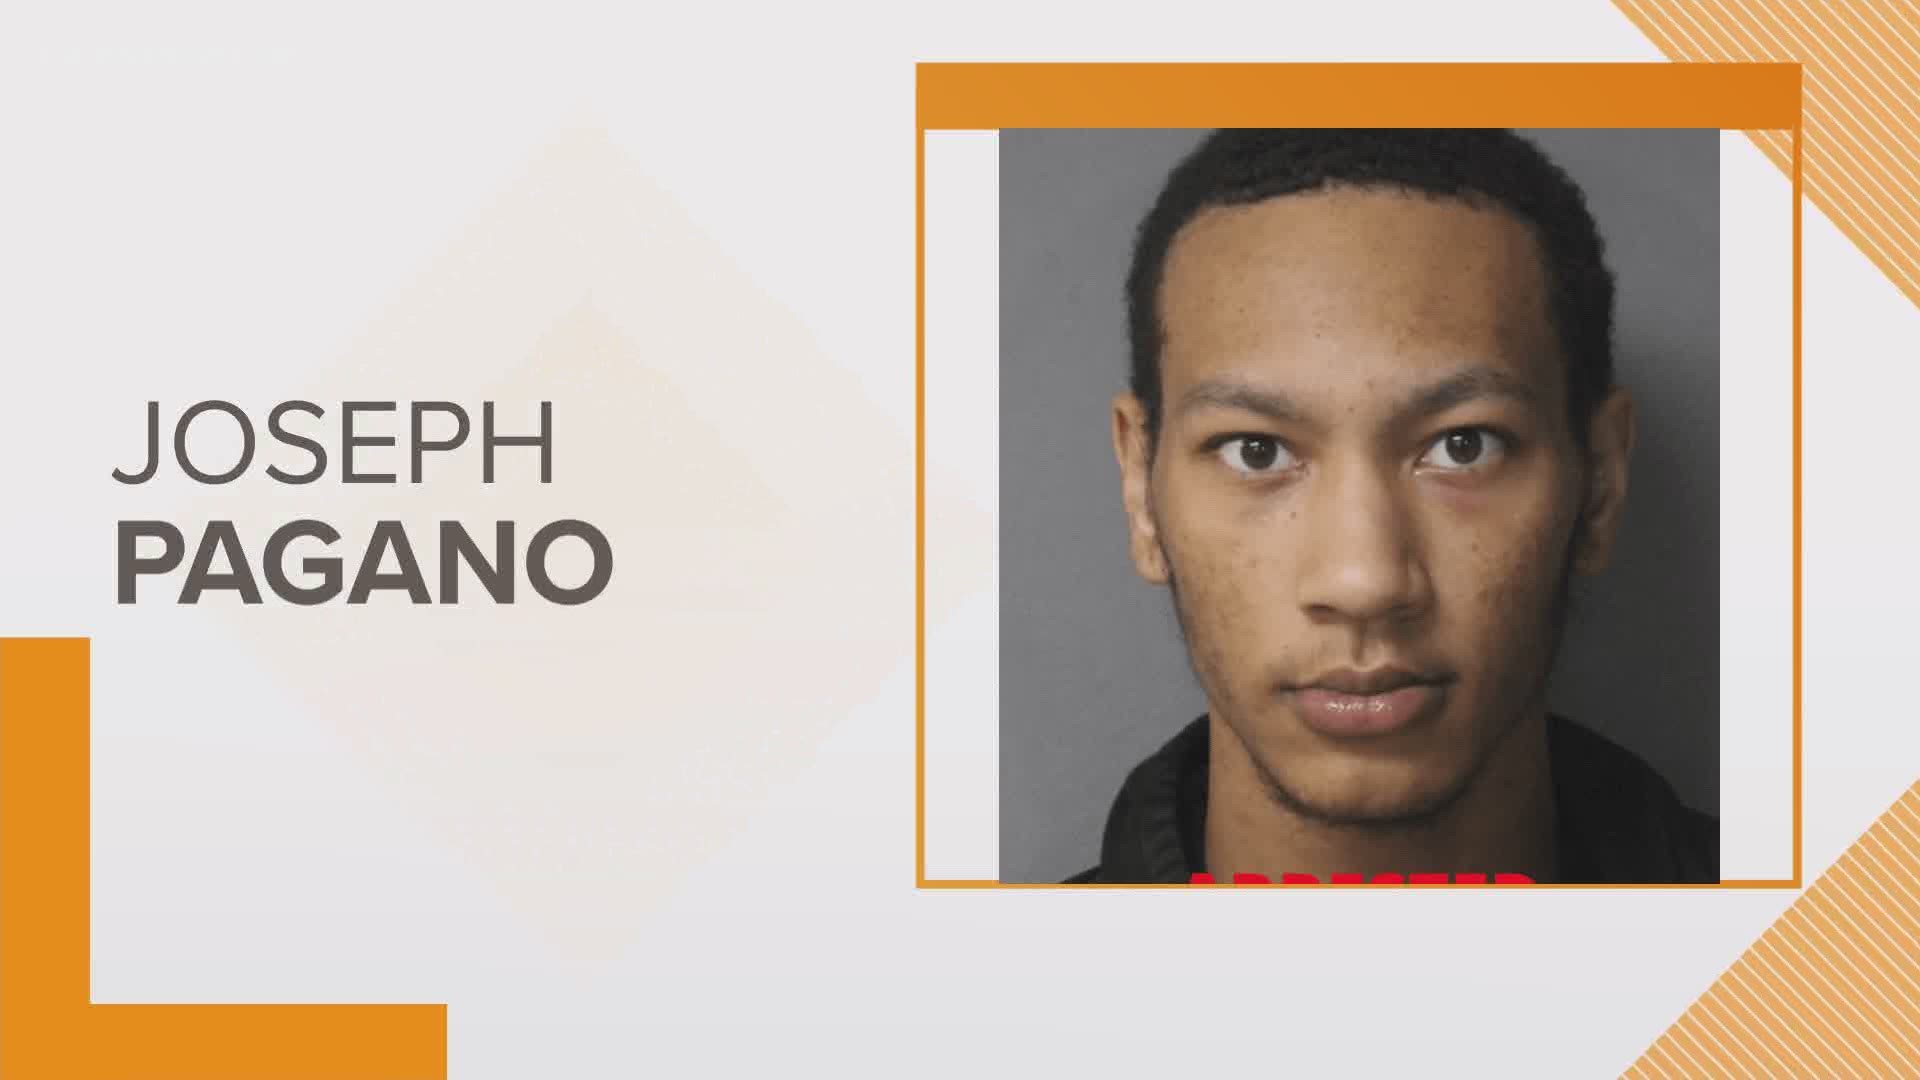 Joseph Pagano, 20, was charged with second-degree murder and use of a firearm.